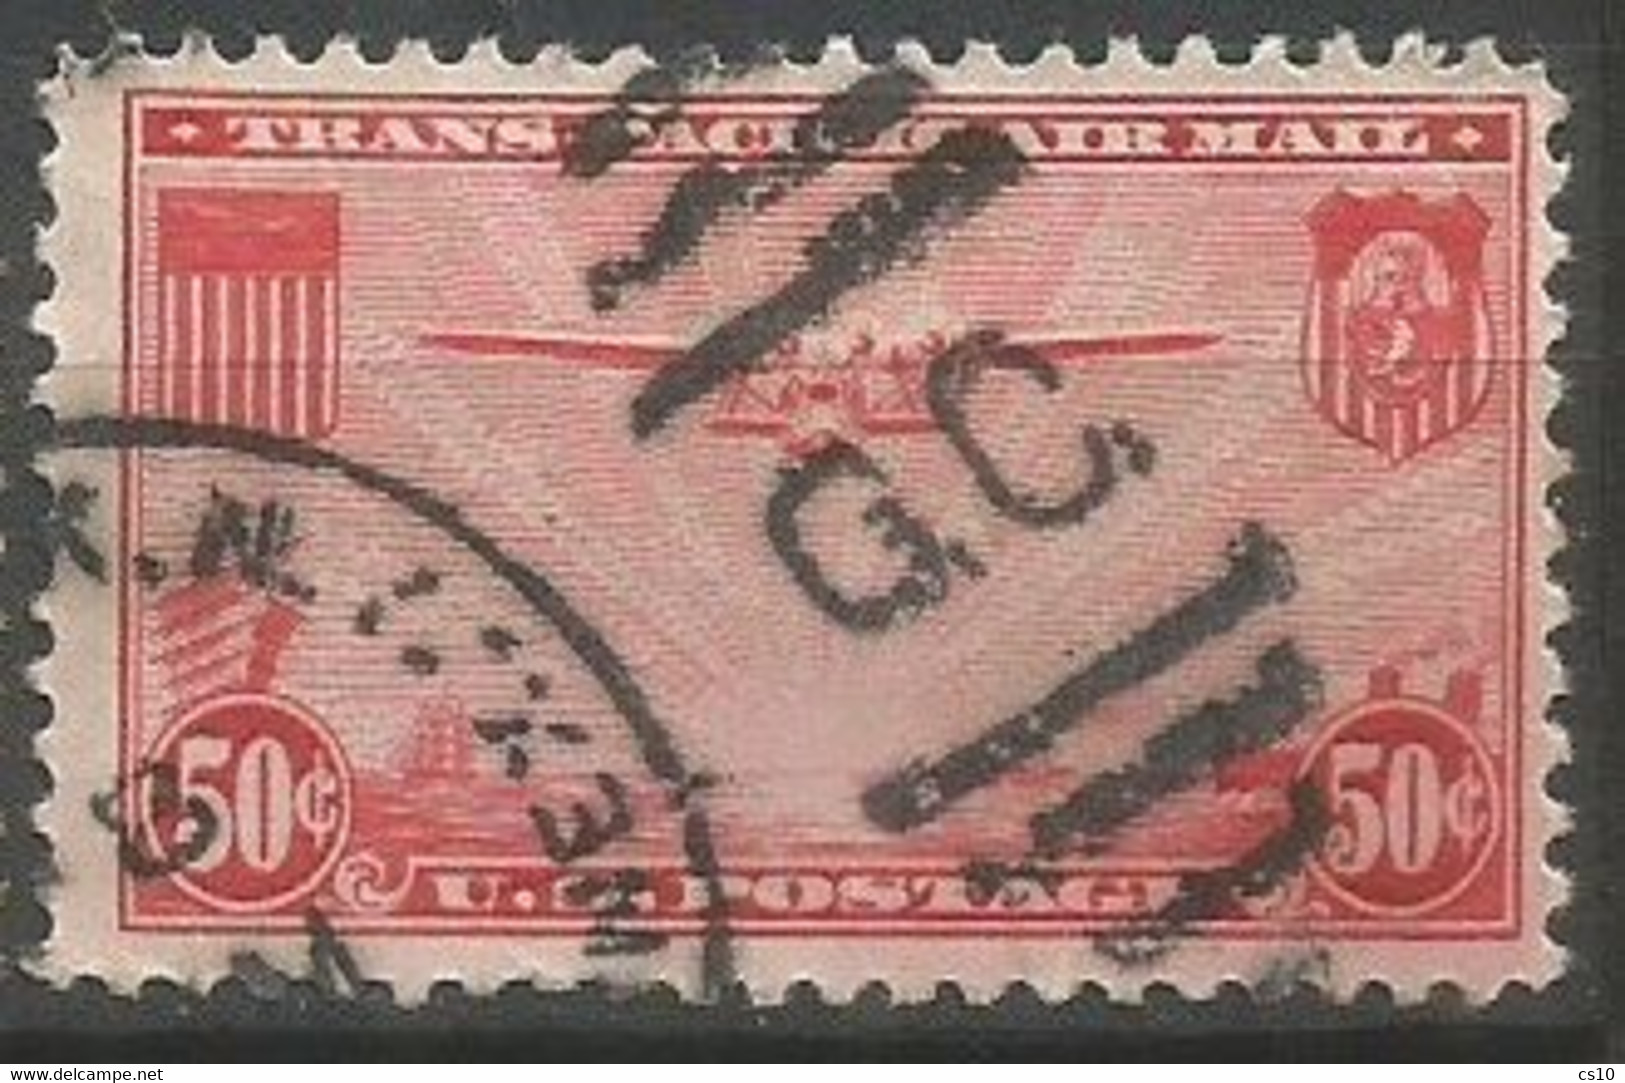 USA Airpost Air Mail 1937 "China Clipper"  Trans-Pacific Issue Date Omitted C.50 SC.# C22 - Good Used - 1a. 1918-1940 Used